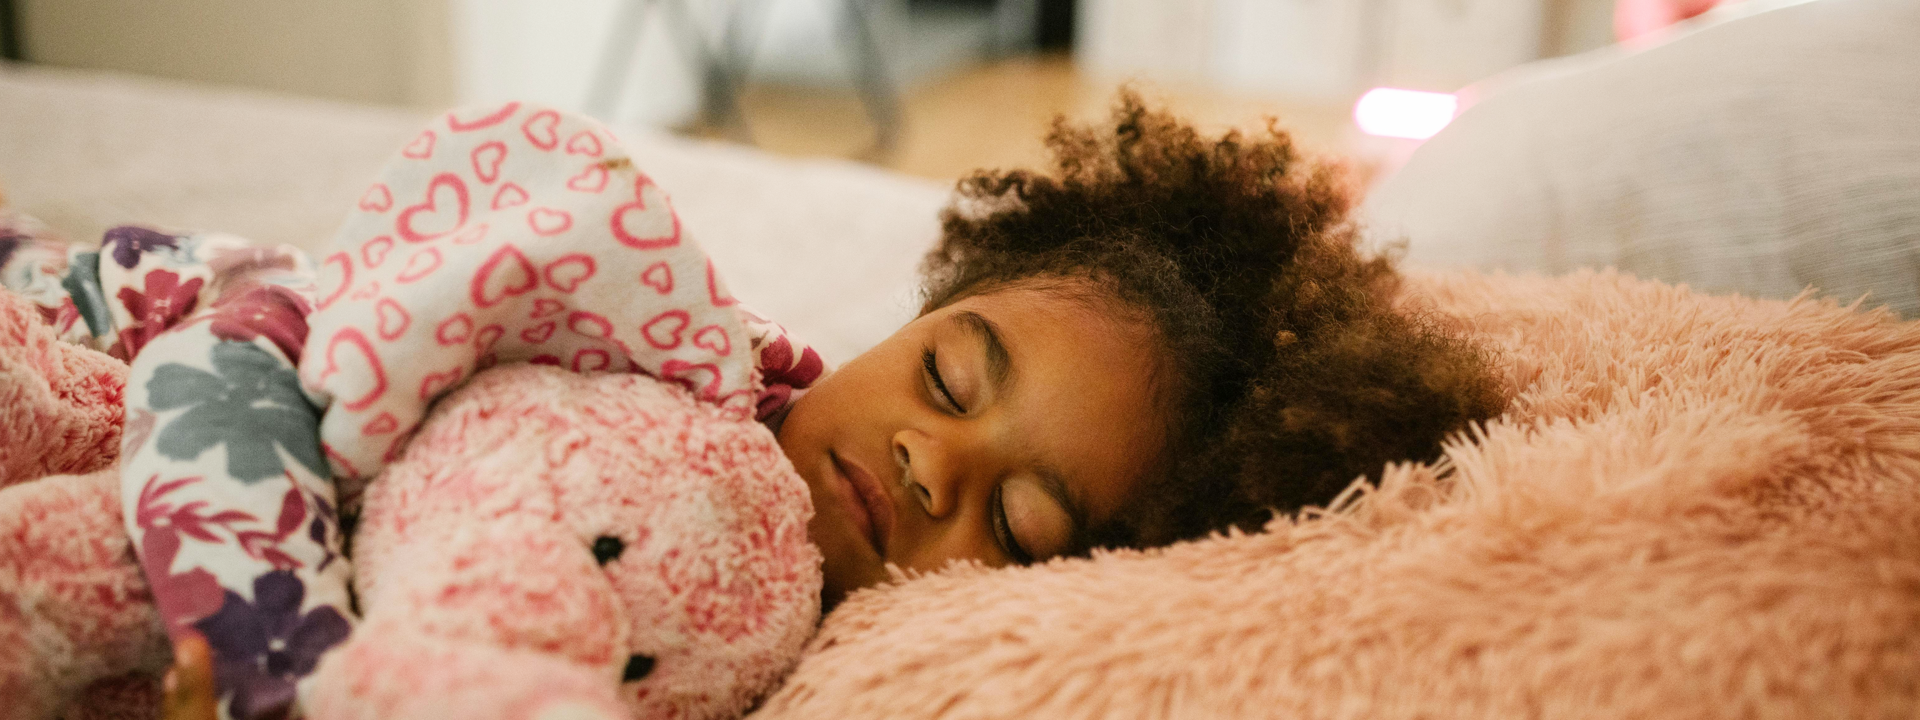 Tips to Help Your Child Get a Good Night’s Sleep